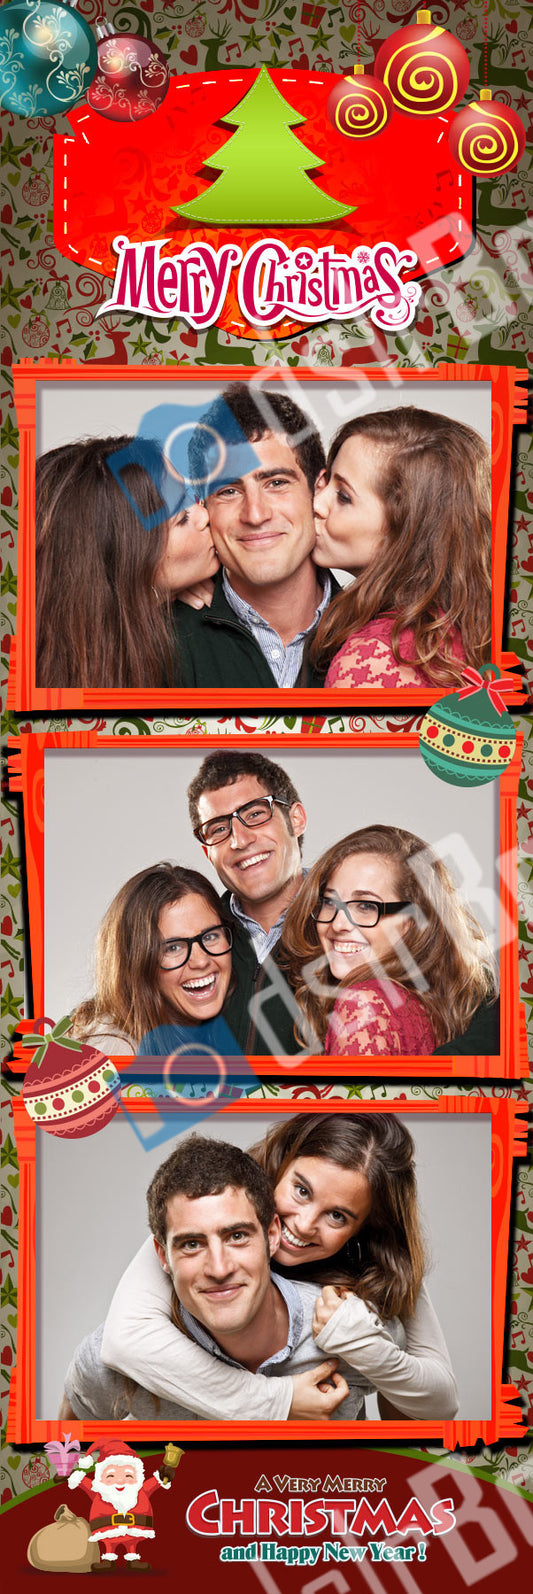 Christmas 3 Poses Red Frames Vertical Strip